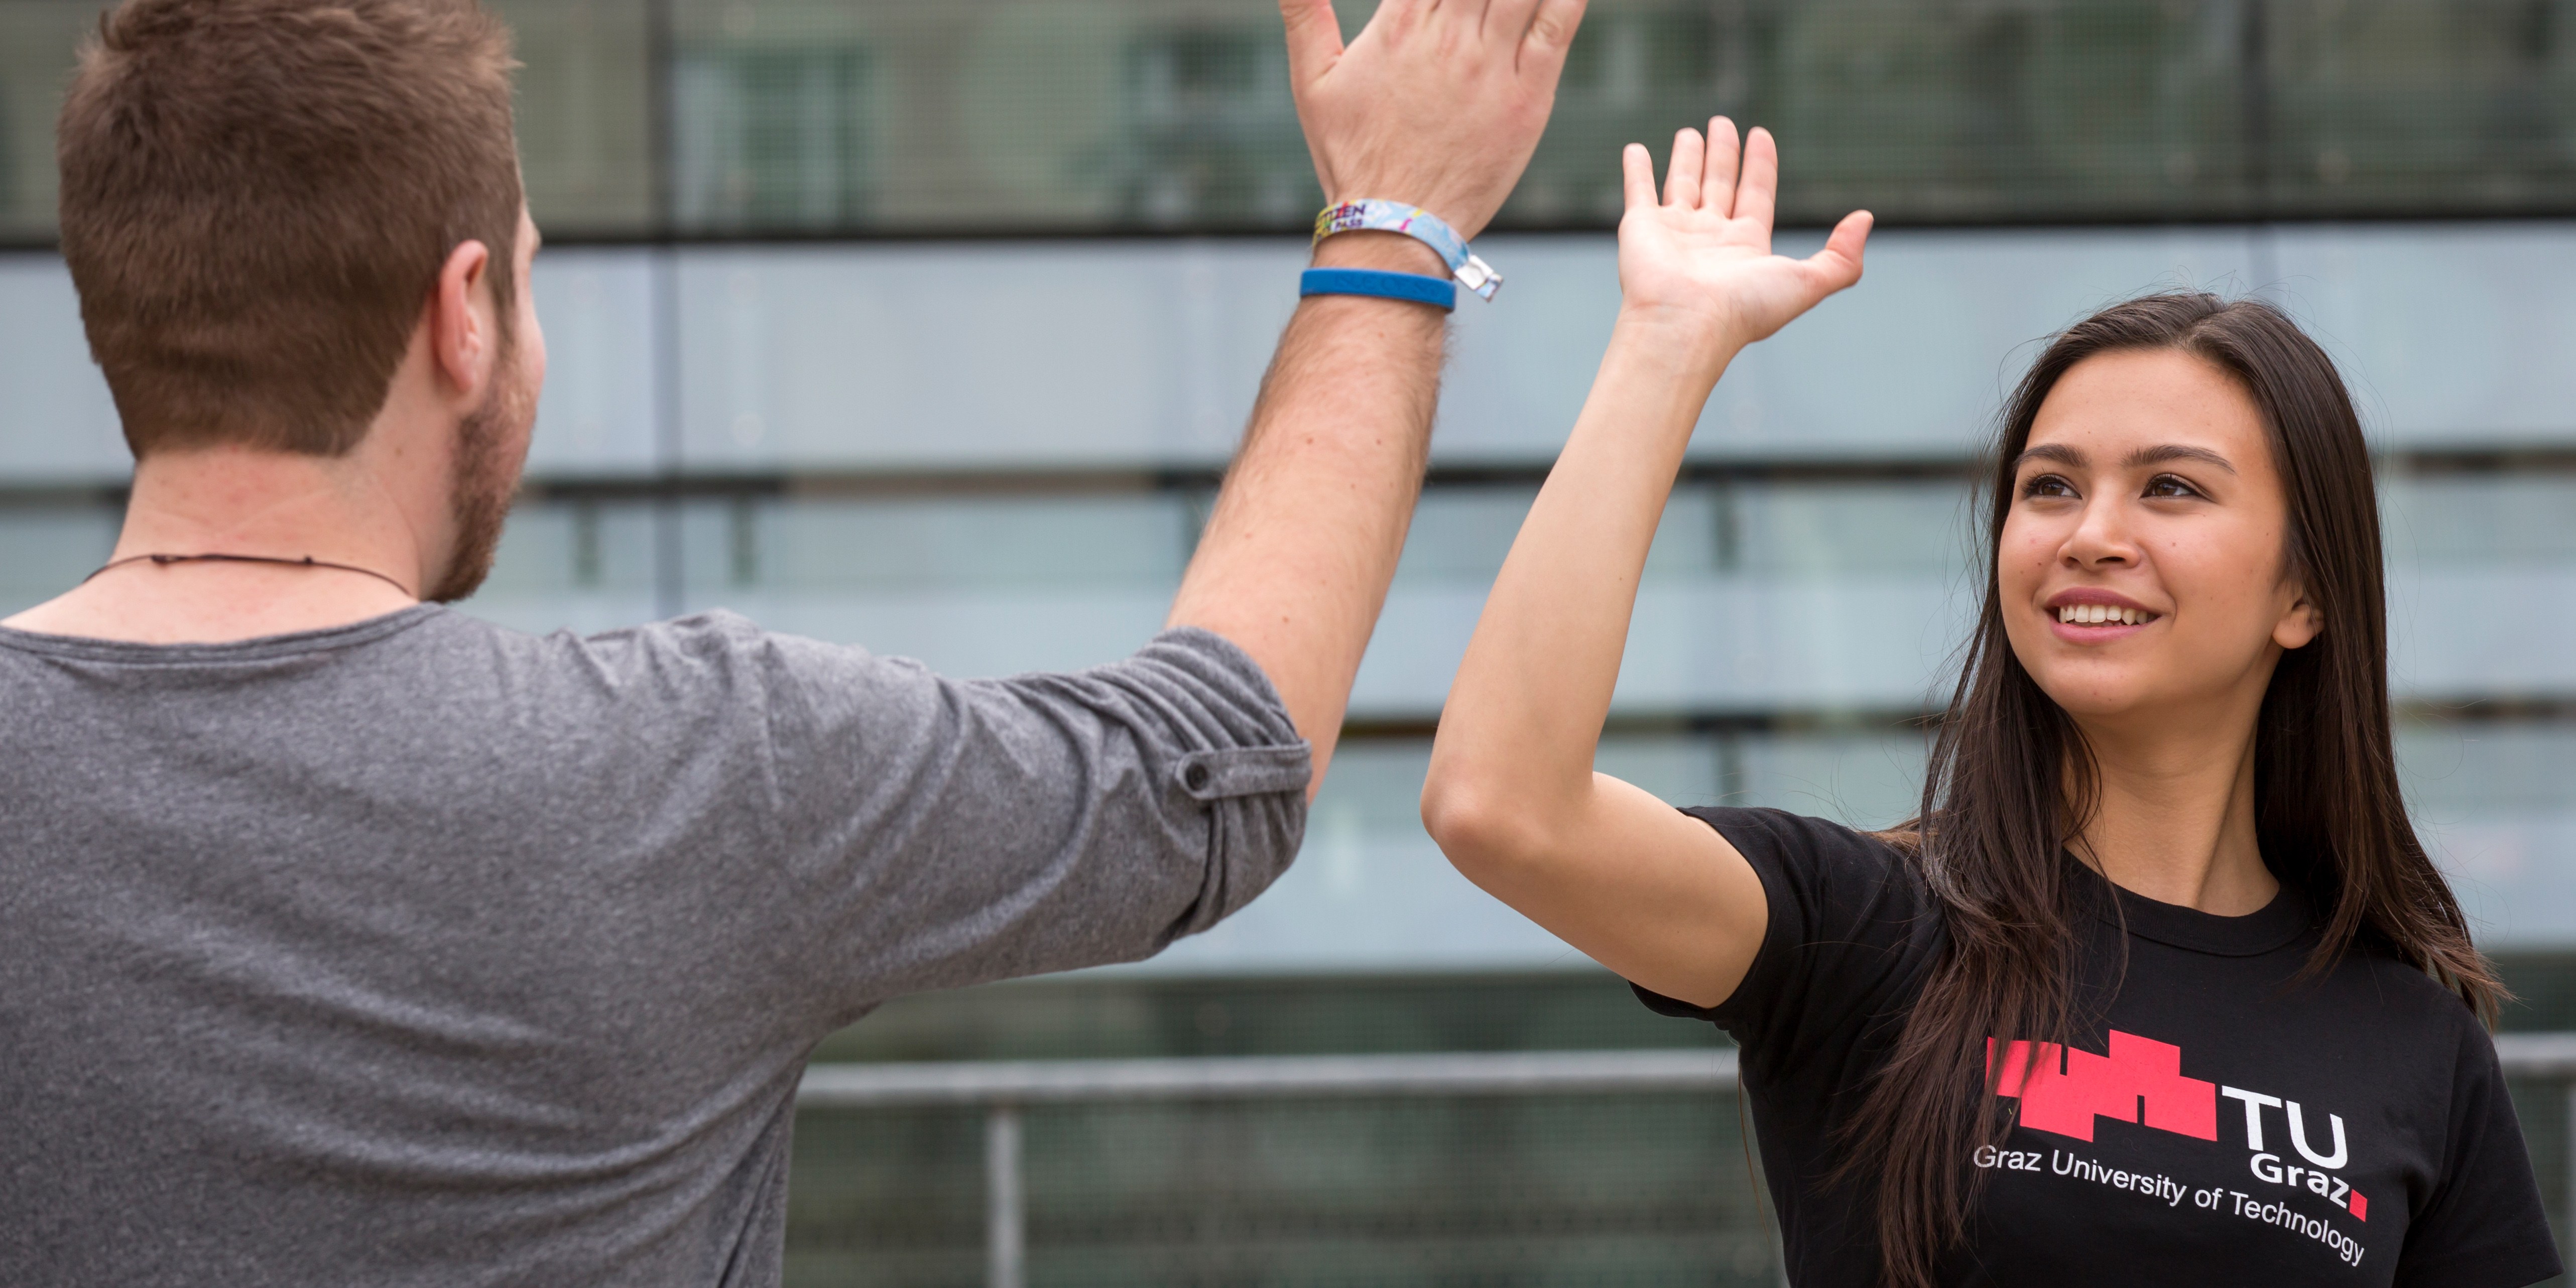 A male student wearing a grey shirt and a female student wearing a black TU Graz shirt give each other a high five.